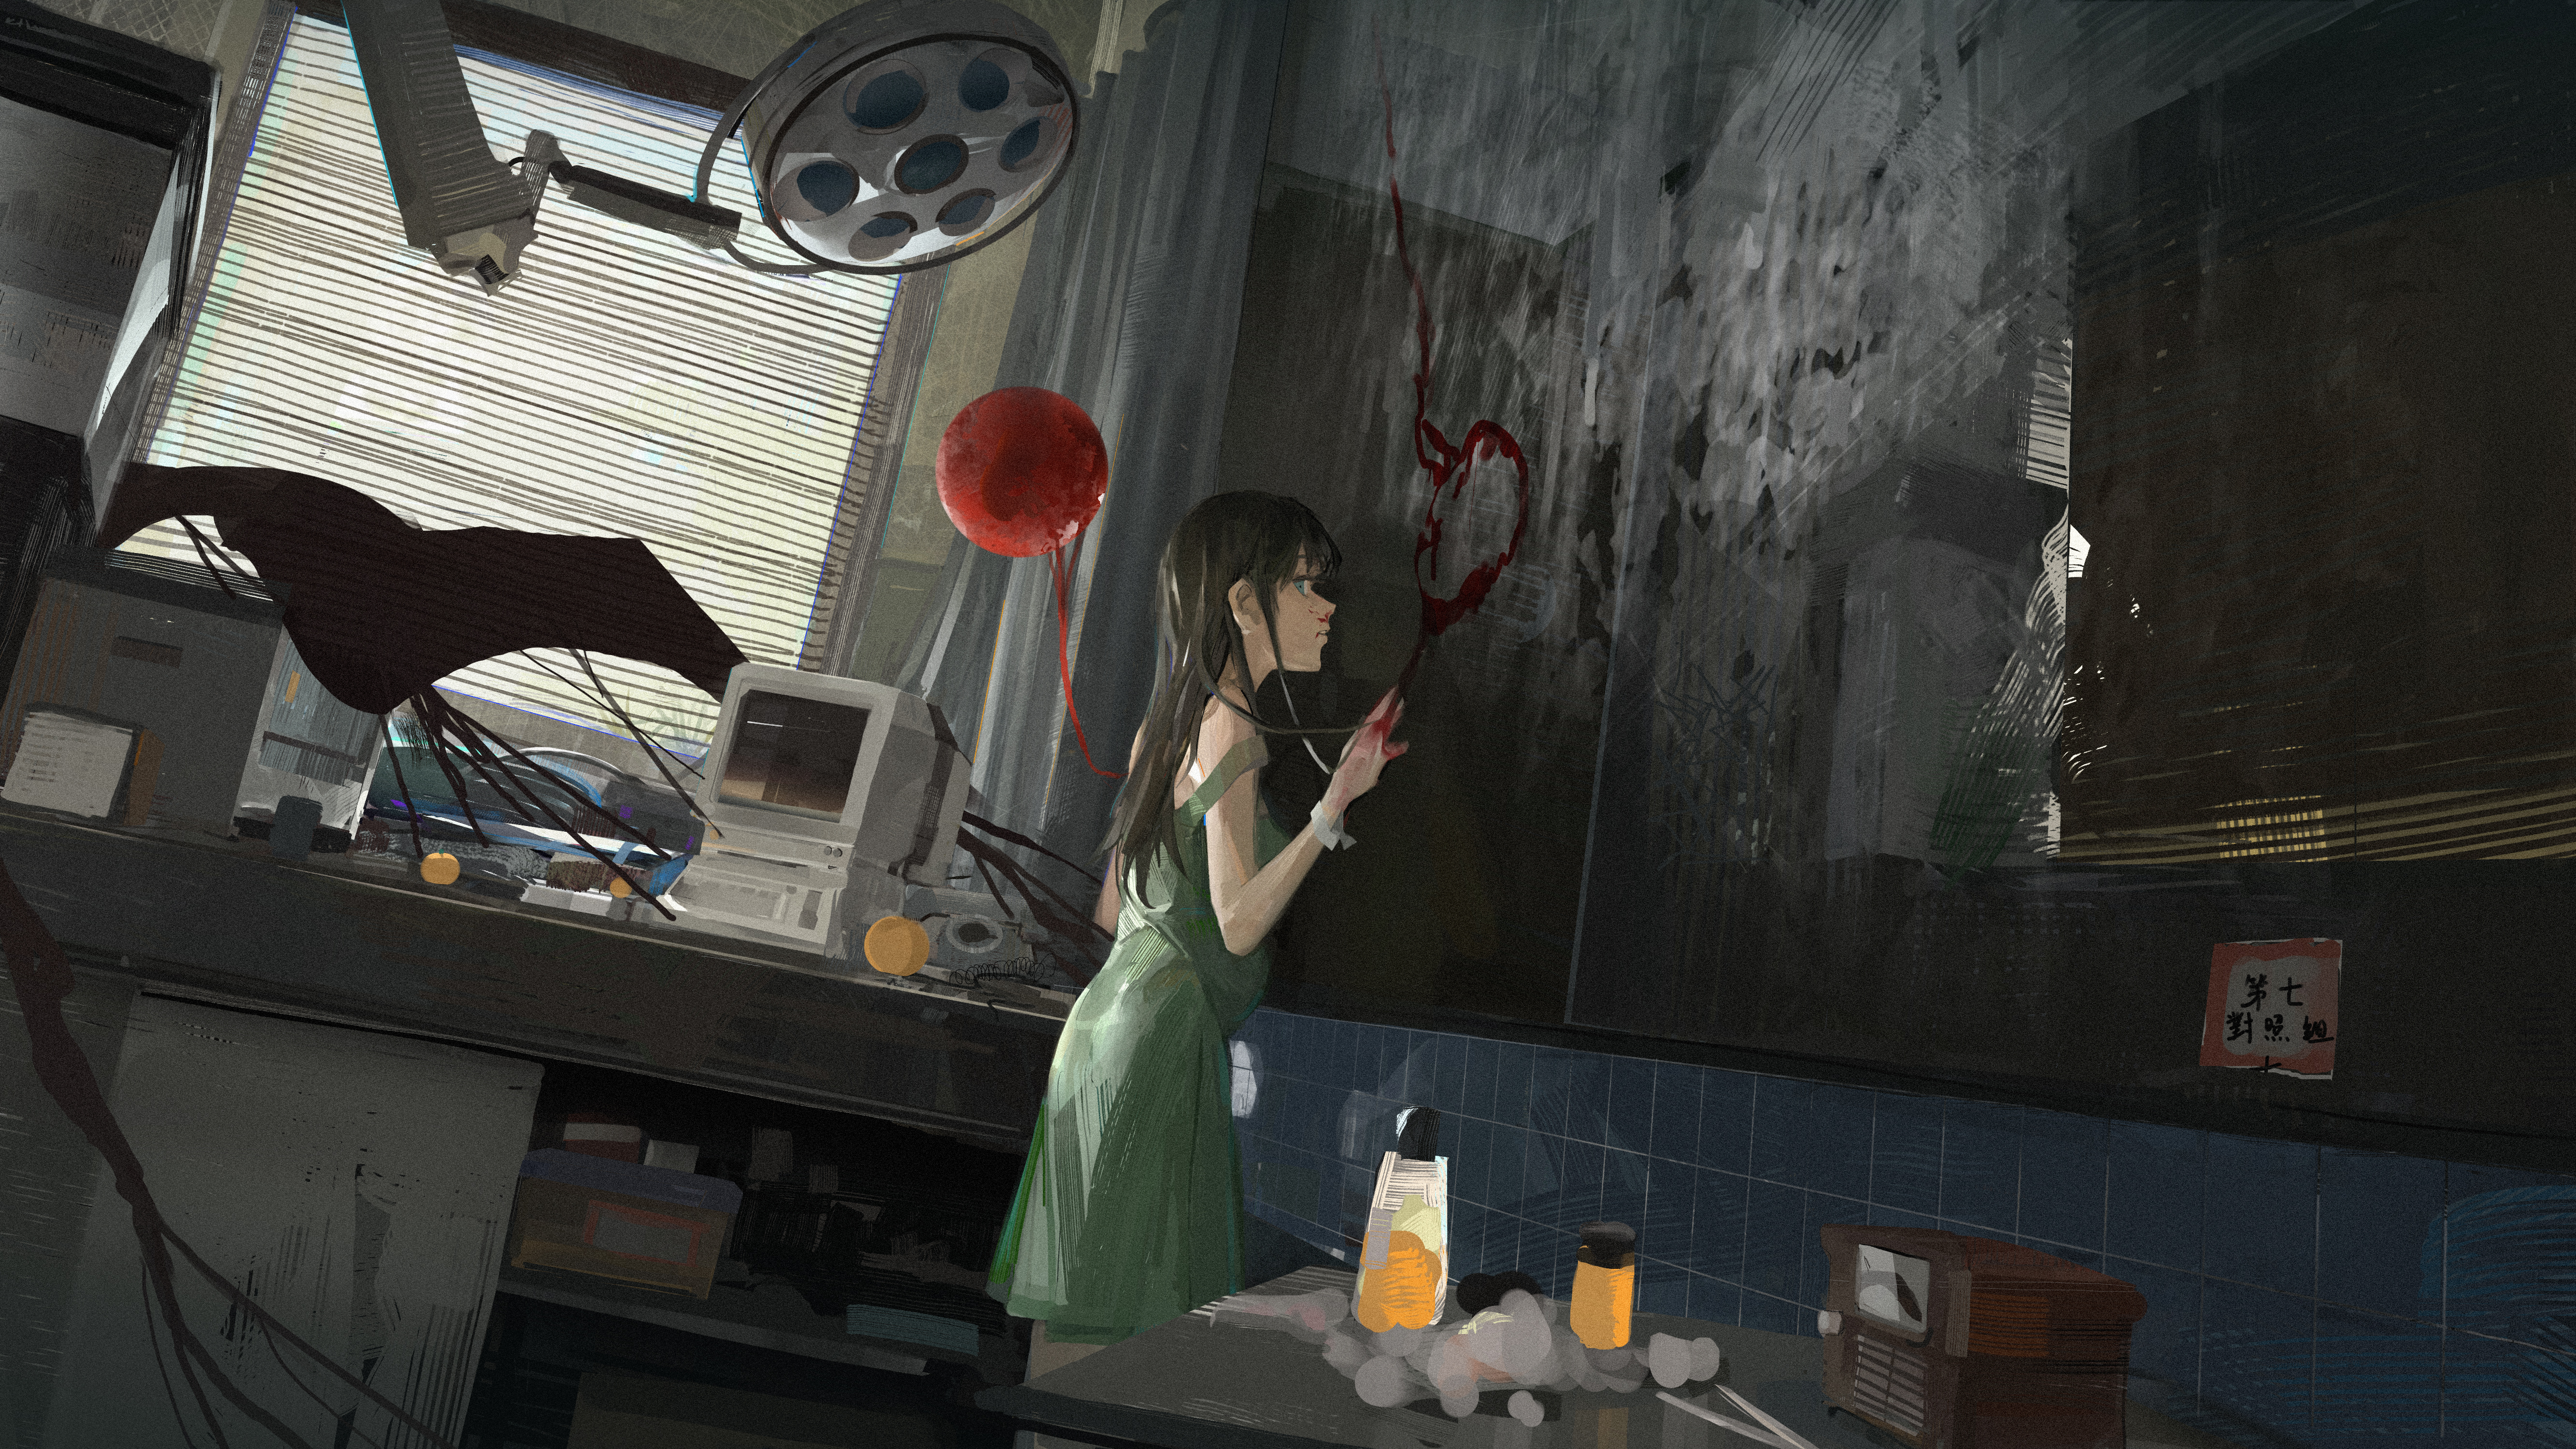 Girl drawing balloon on a room glass by Paindude